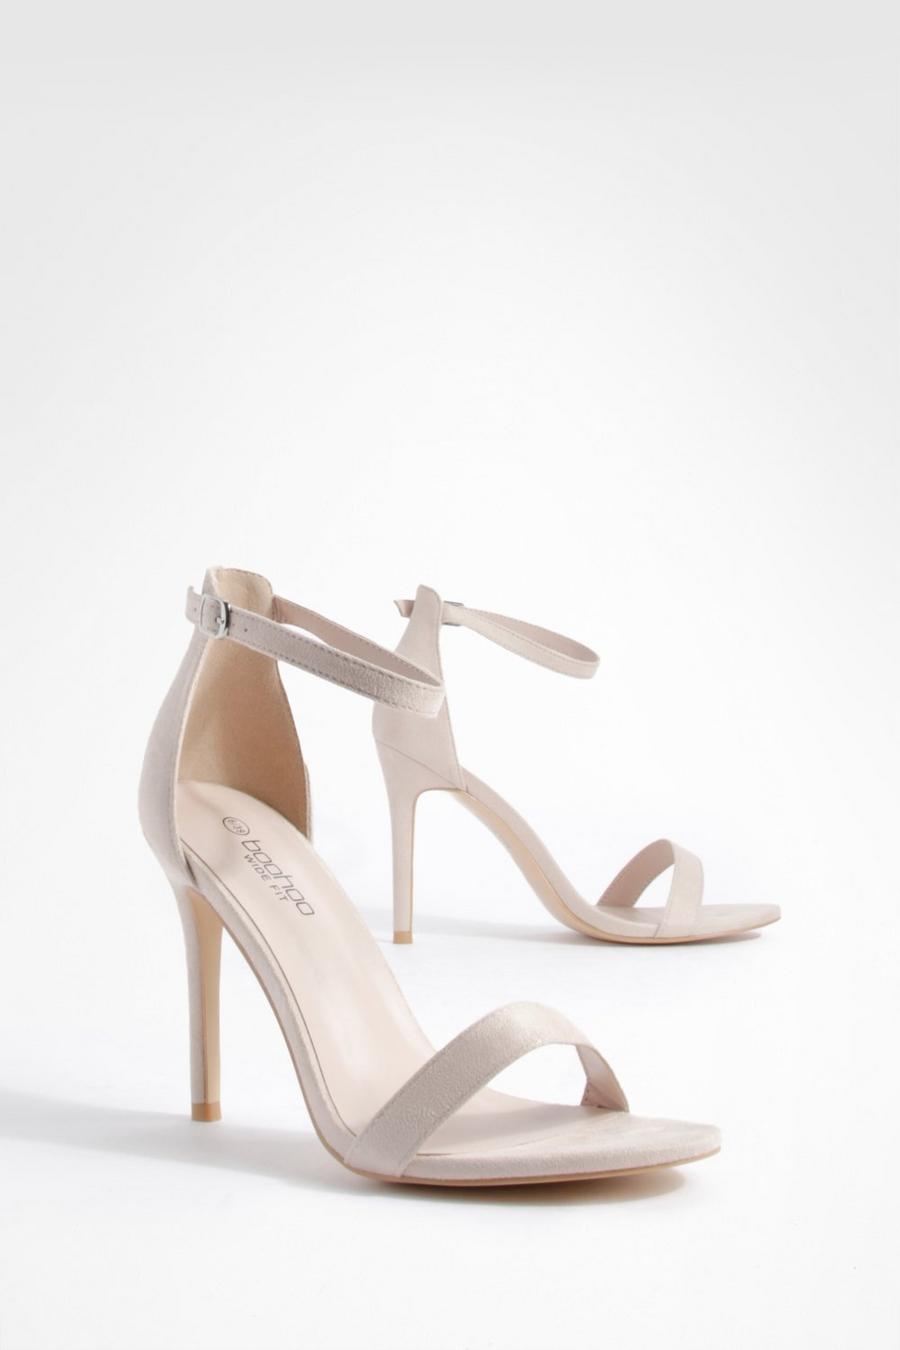 Blush Wide Width Barely There Basic Heels